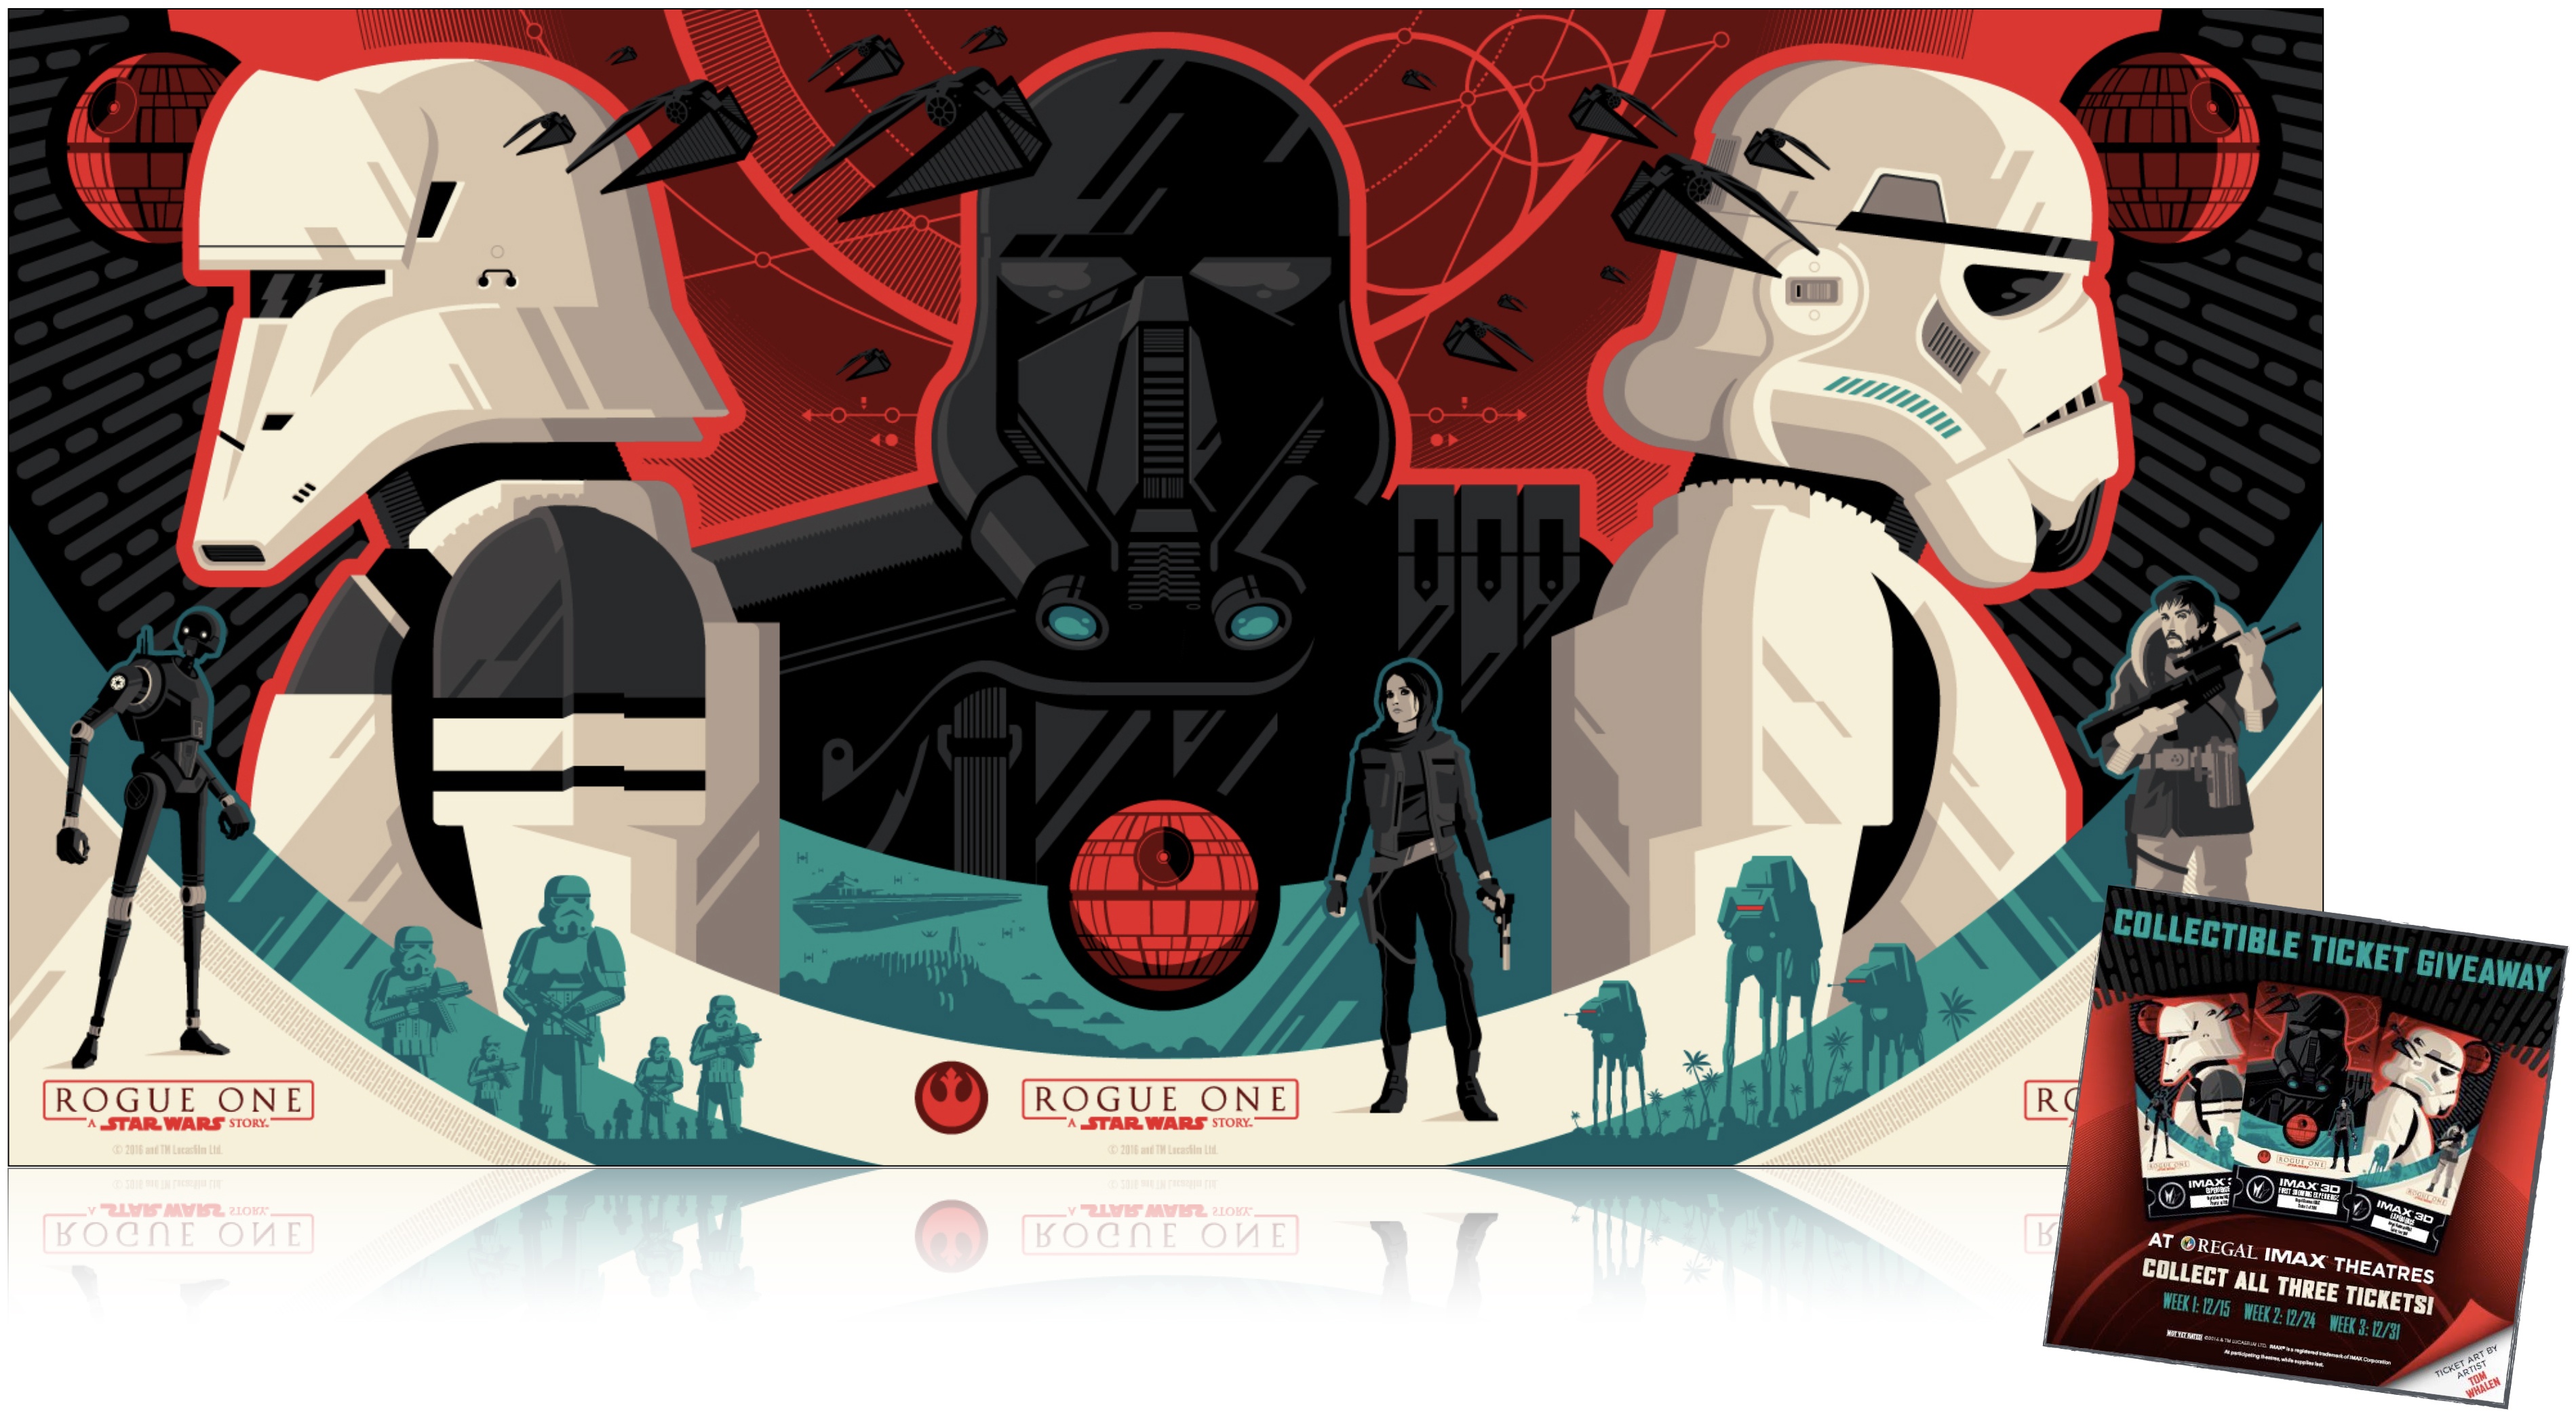 NYX Awards 2018 Winner - Rogue One - Special Edition IMAX Posters 